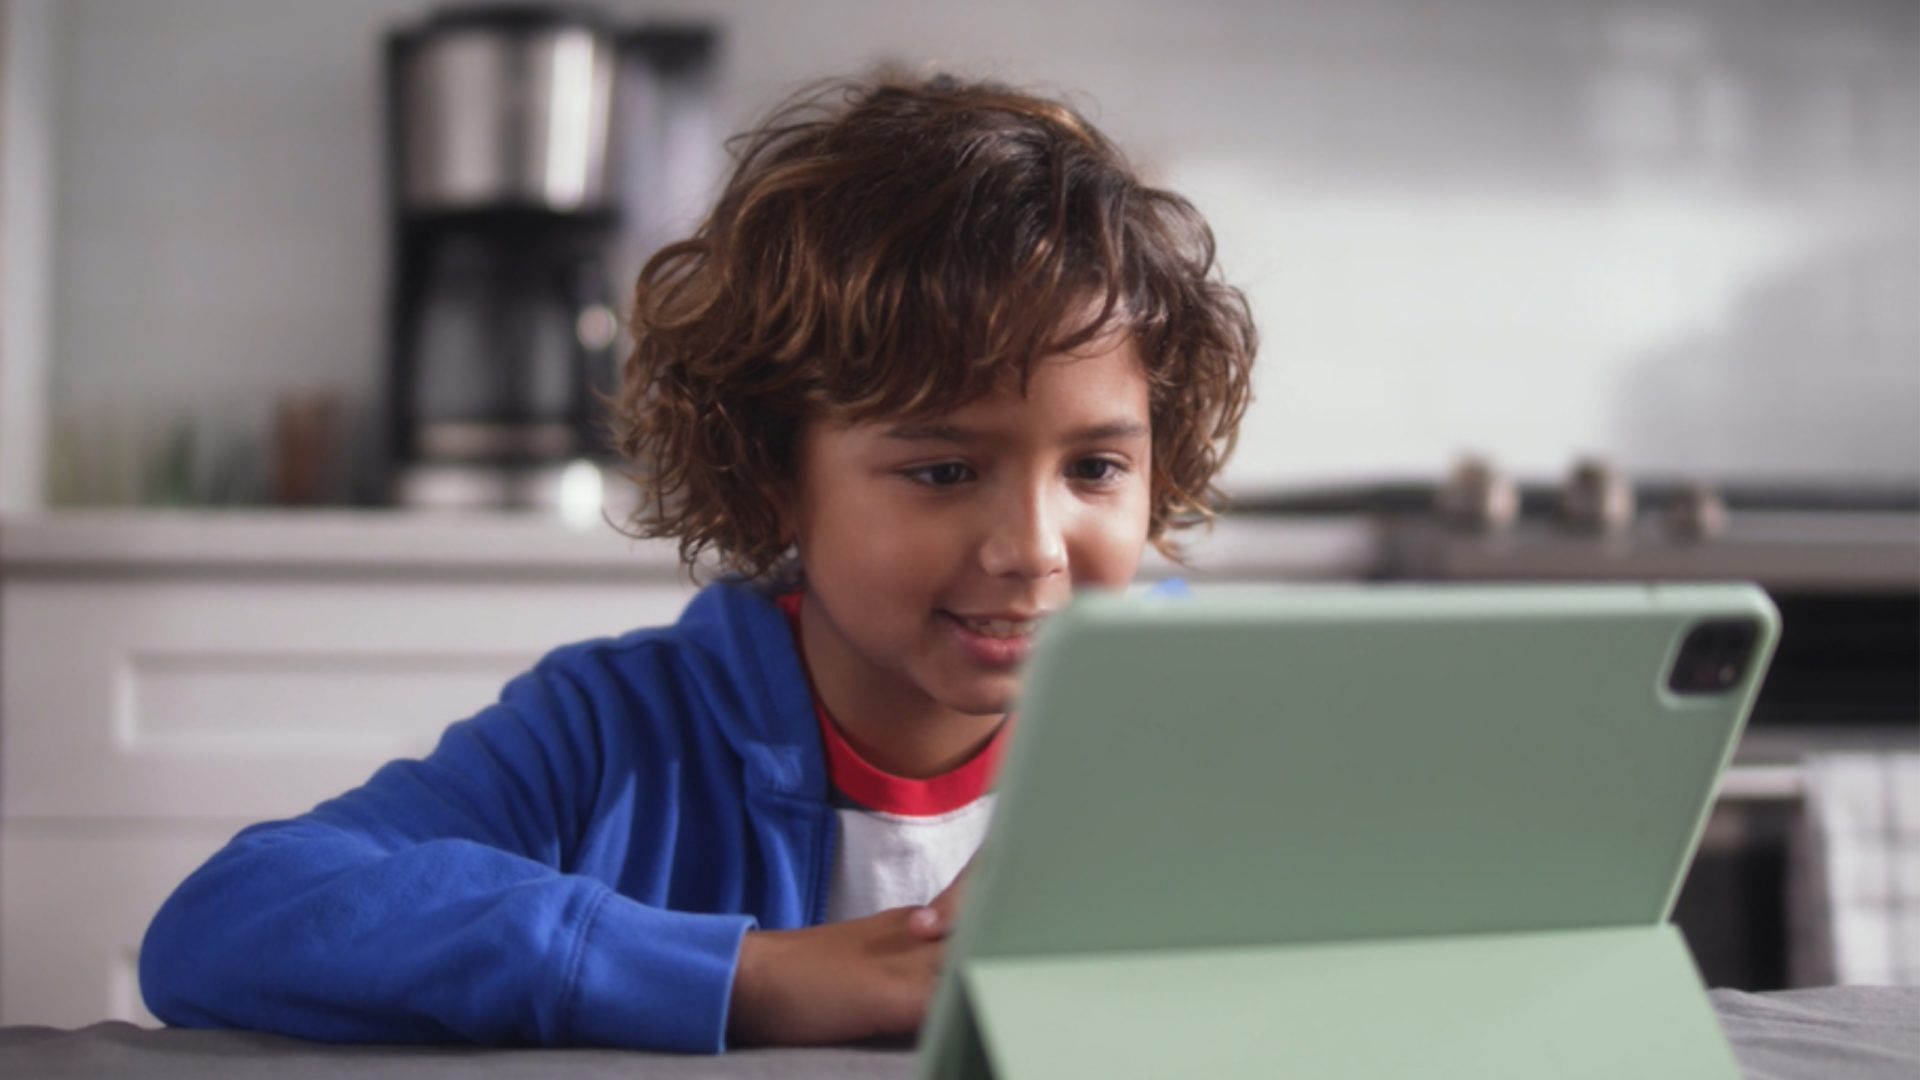 A photo of a boy sitting at a kitchen table talking into a voice-enabled device, powered by speech recognition technology from SoapBox Labs.